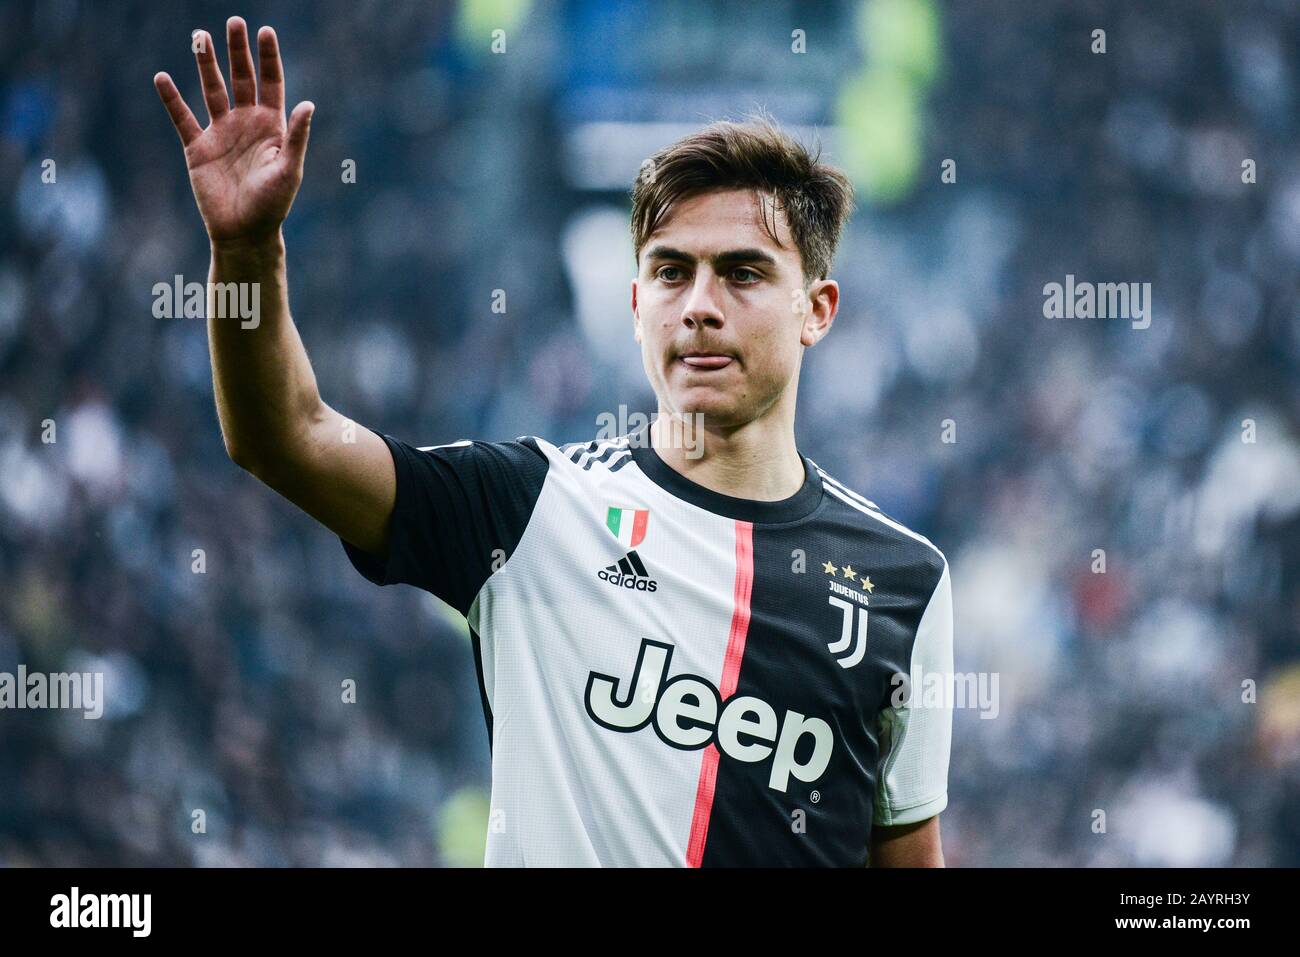 Turin, Italy. 16th Feb, 2020. Paulo Dybala of Juventus FC in action during  the Serie A football match between Juventus FC and Brescia Calcio. Juventus  FC won 2-0 over Brescia Calcio, at